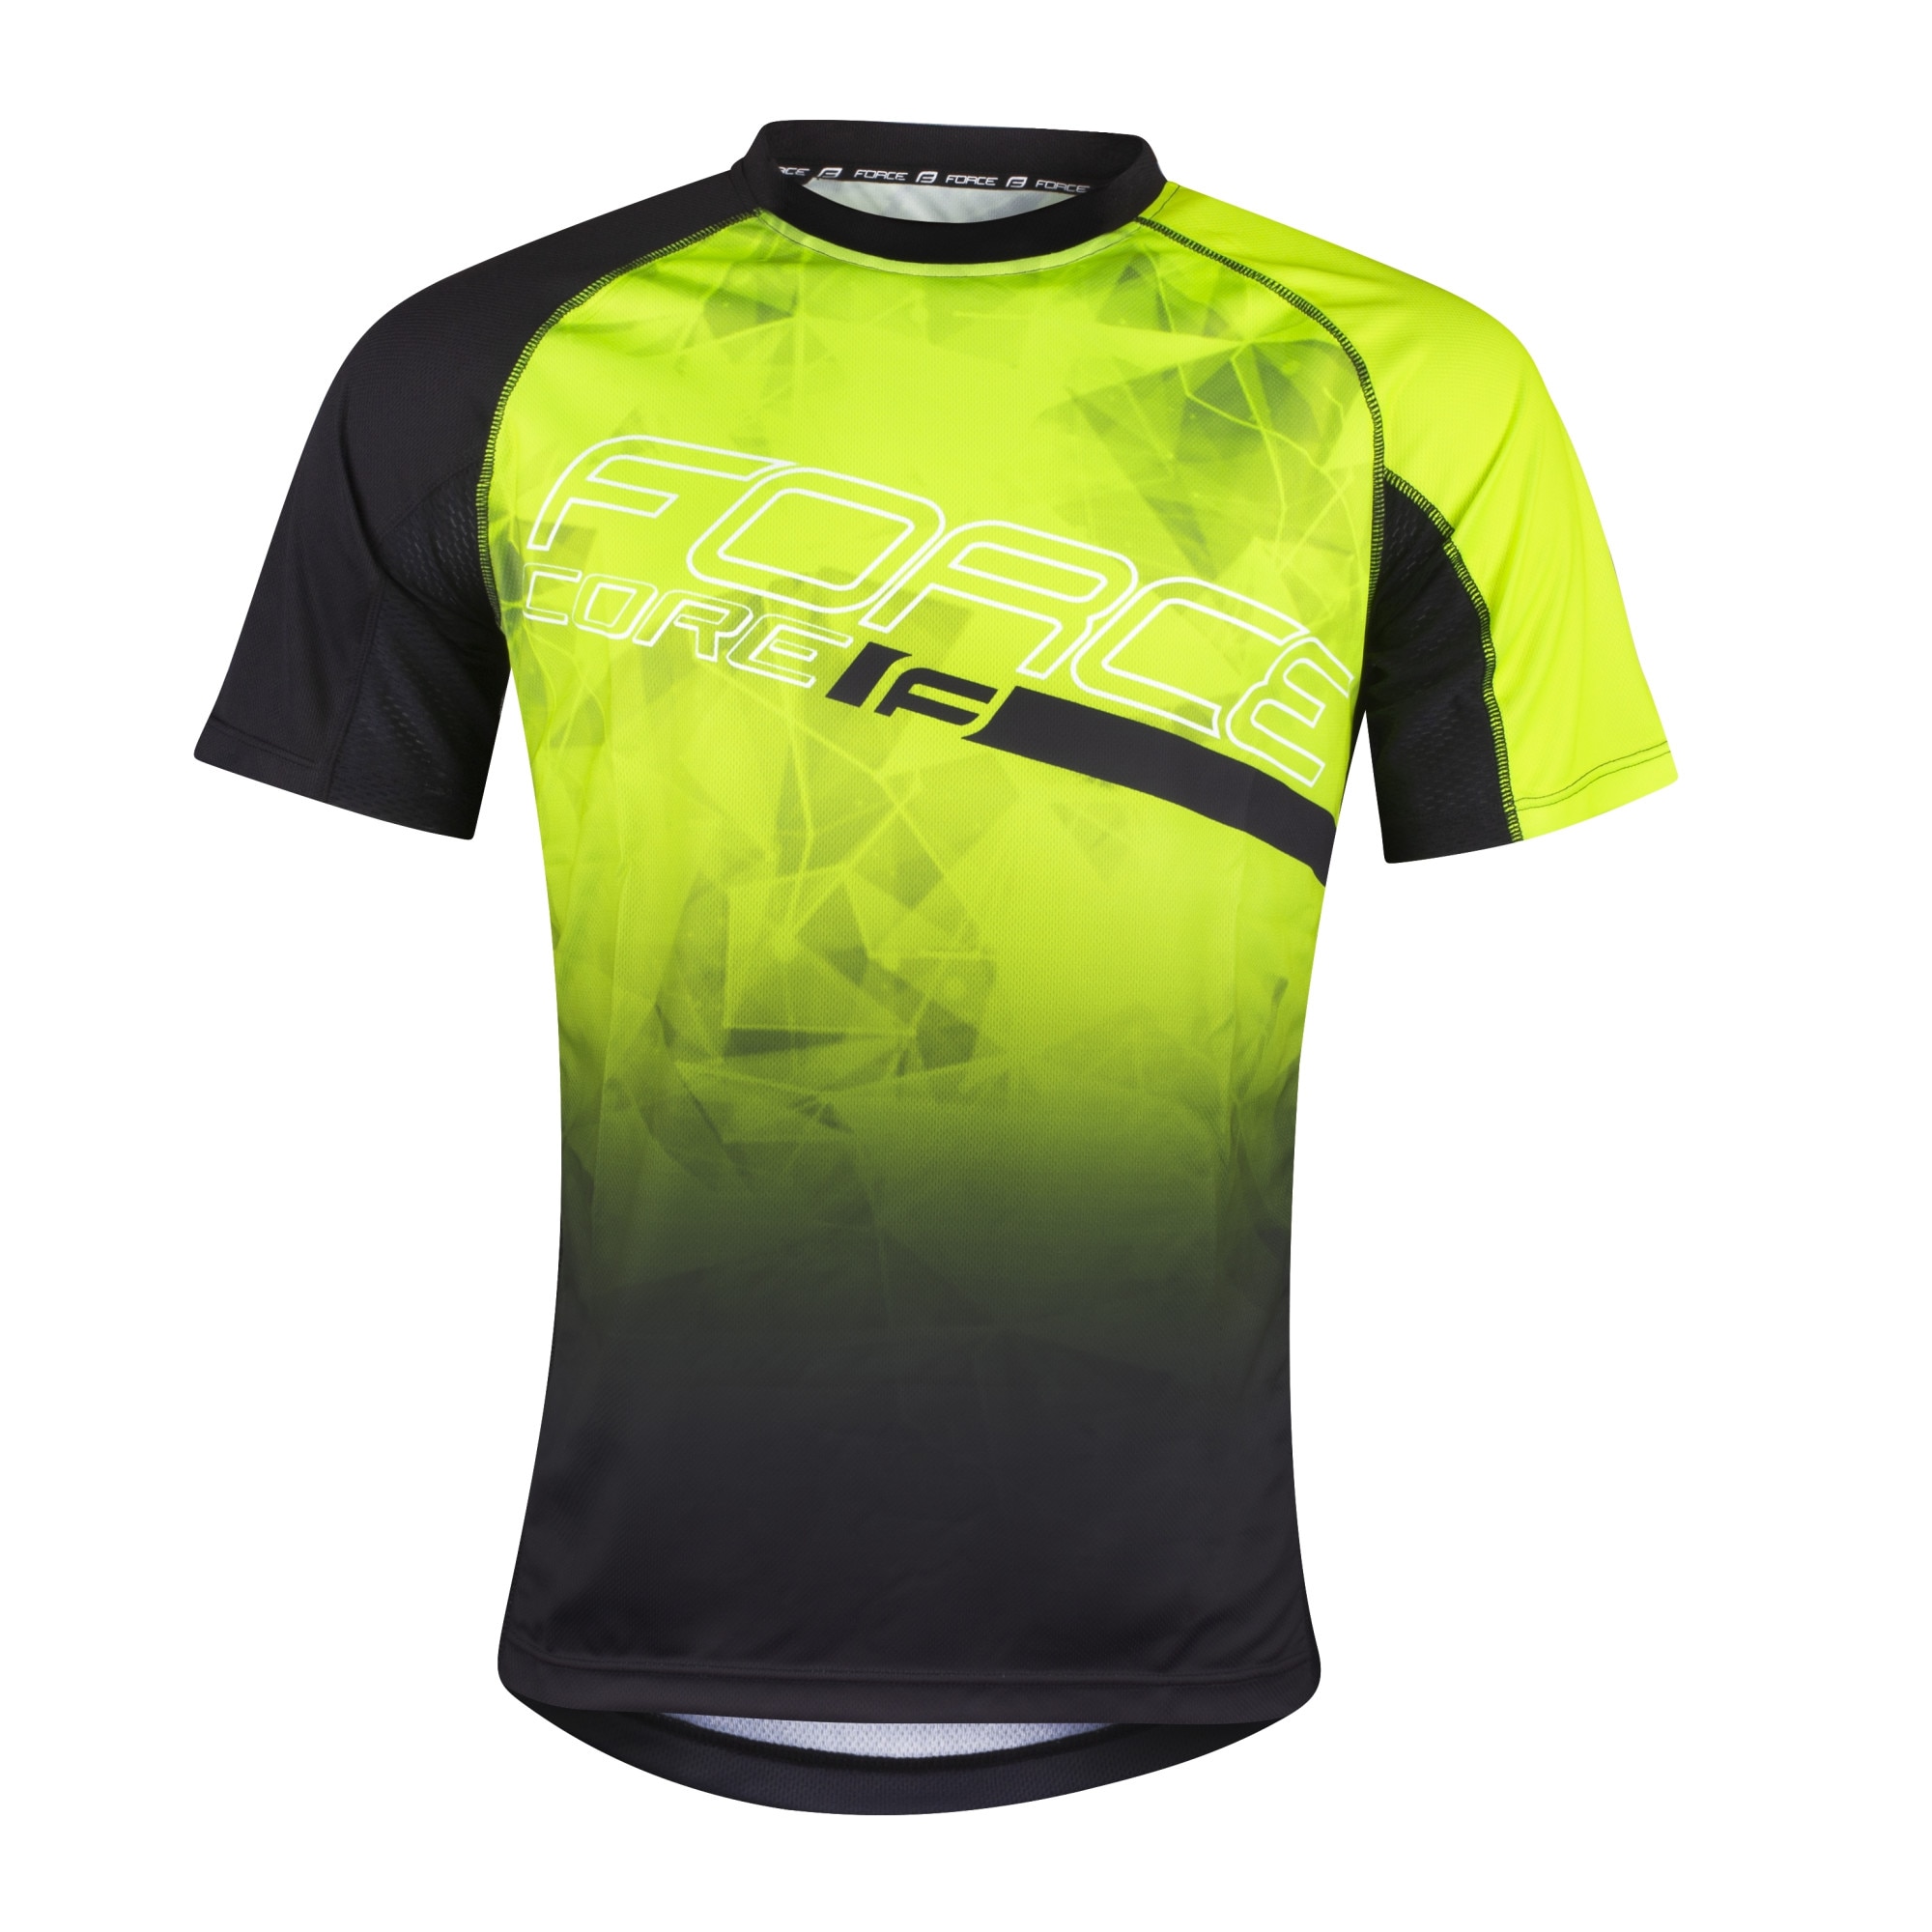 Flare Sophisticated Sale Tricou ciclism Force MTB Core, fluo/negru, L - eMAG.ro